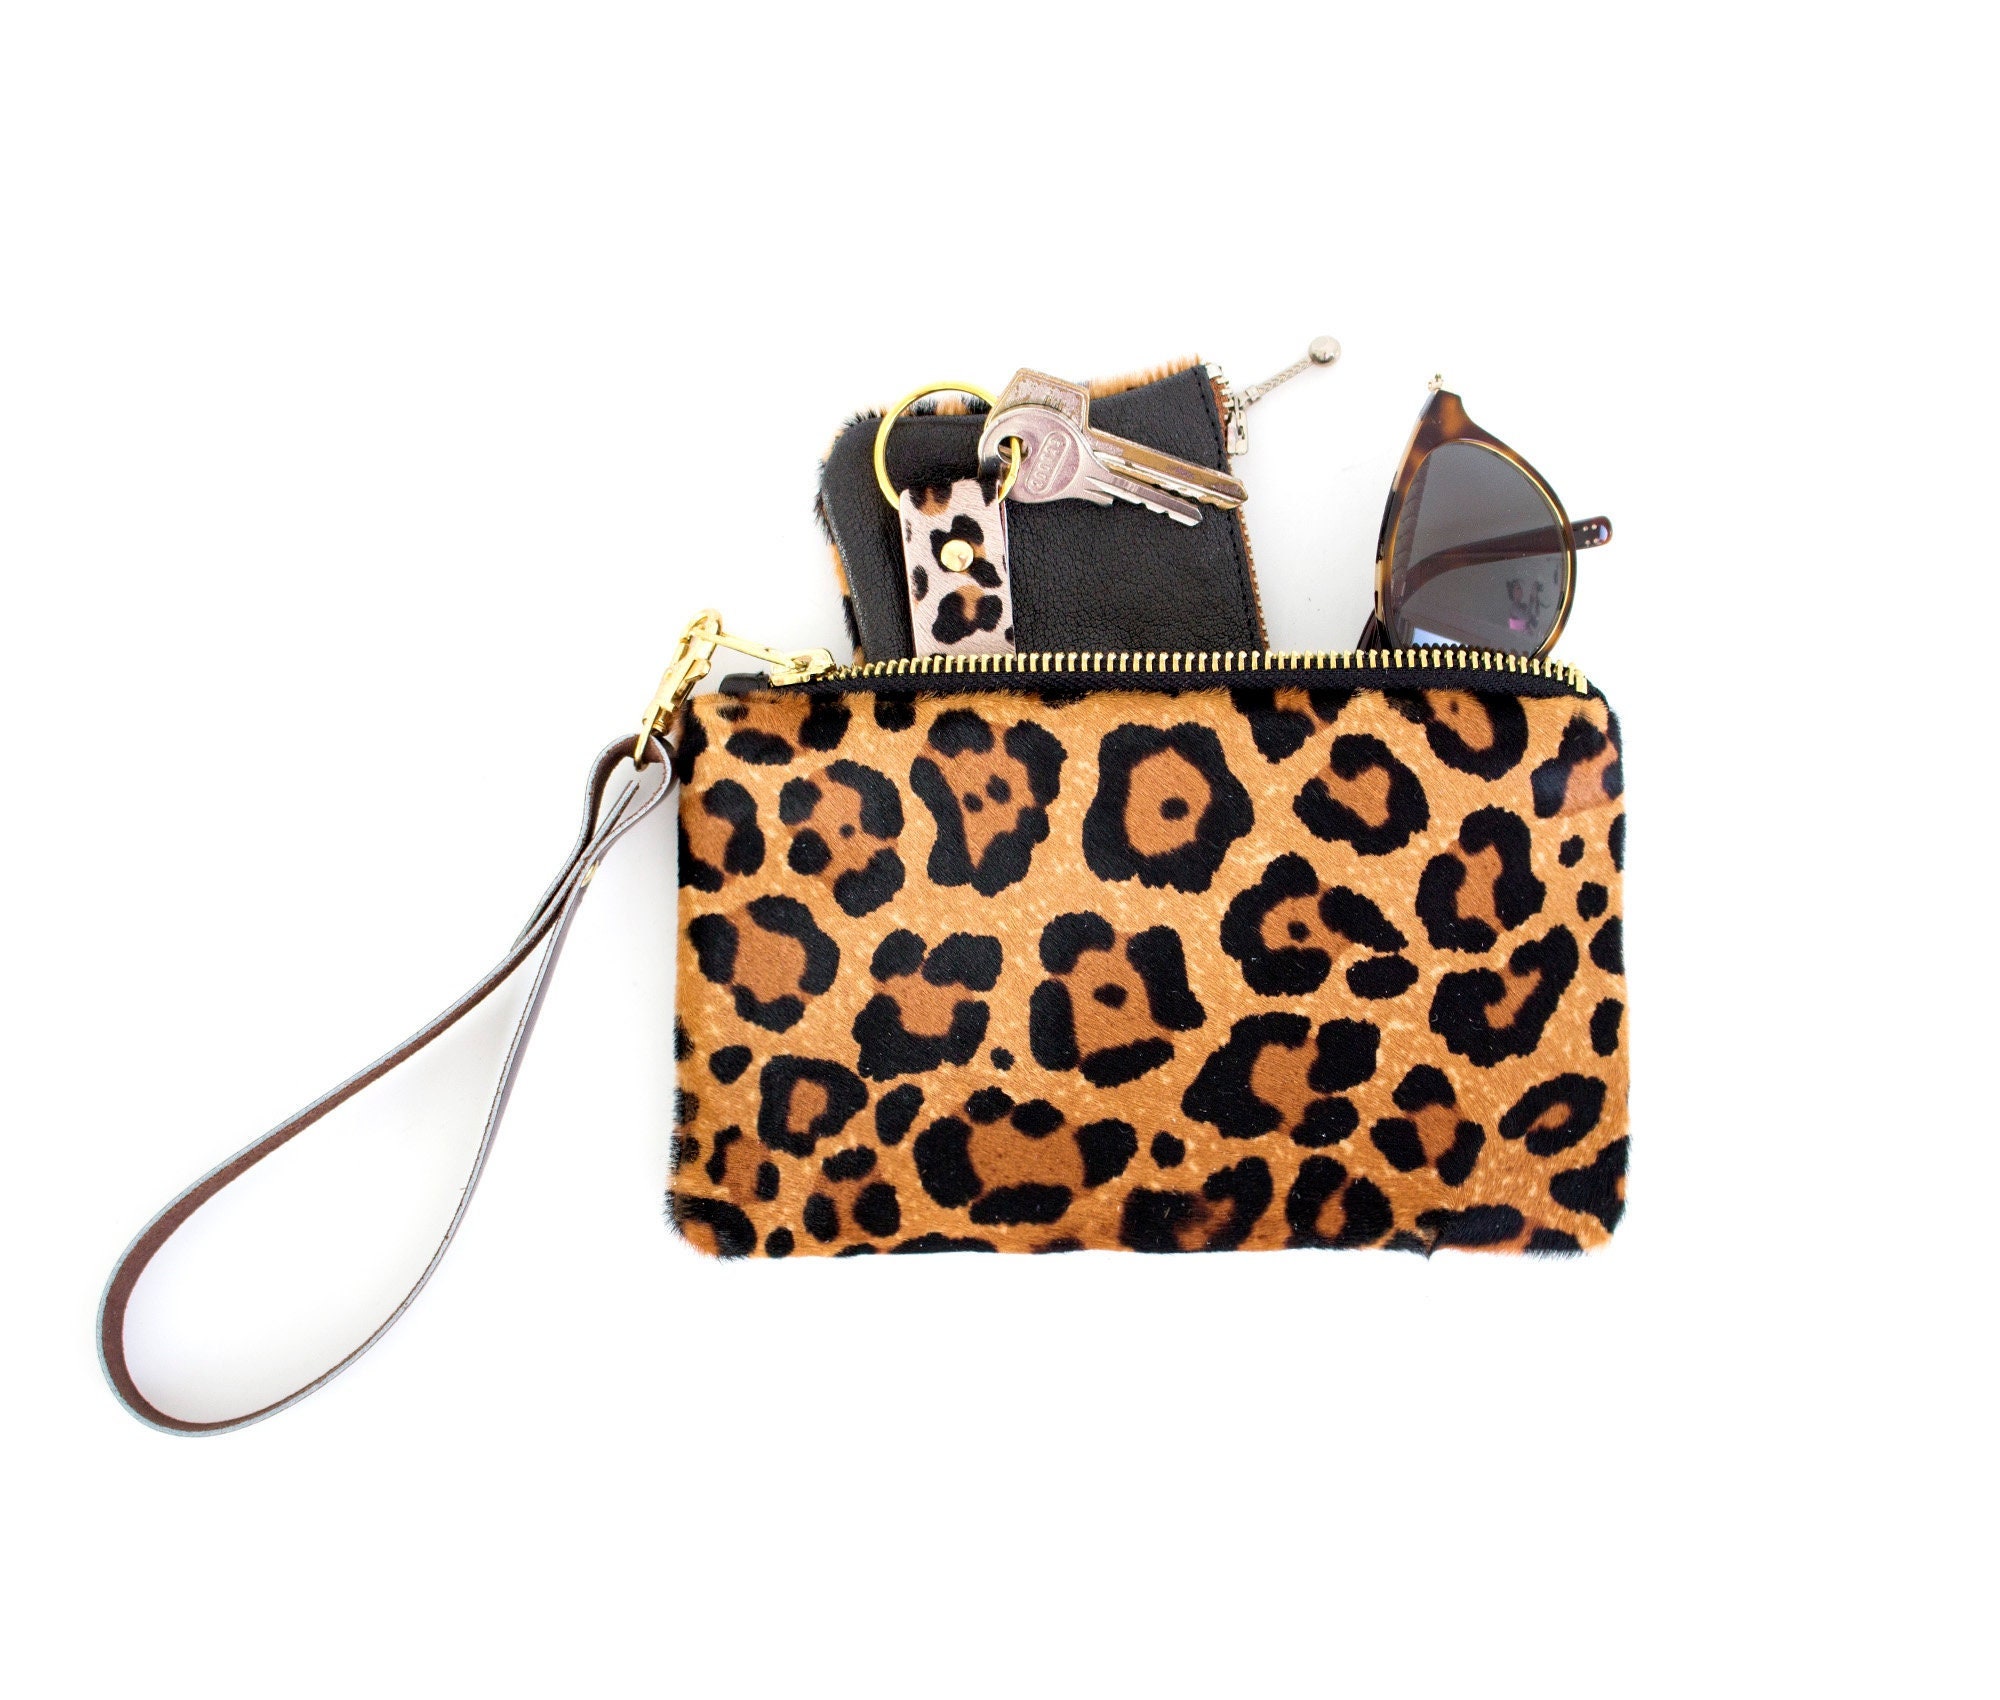 COLE HAAN LEATHER LEOPARD PRINT GENUINE CALF HAIR CLUTCH/WRISTLET BAG SMALL  NWOT